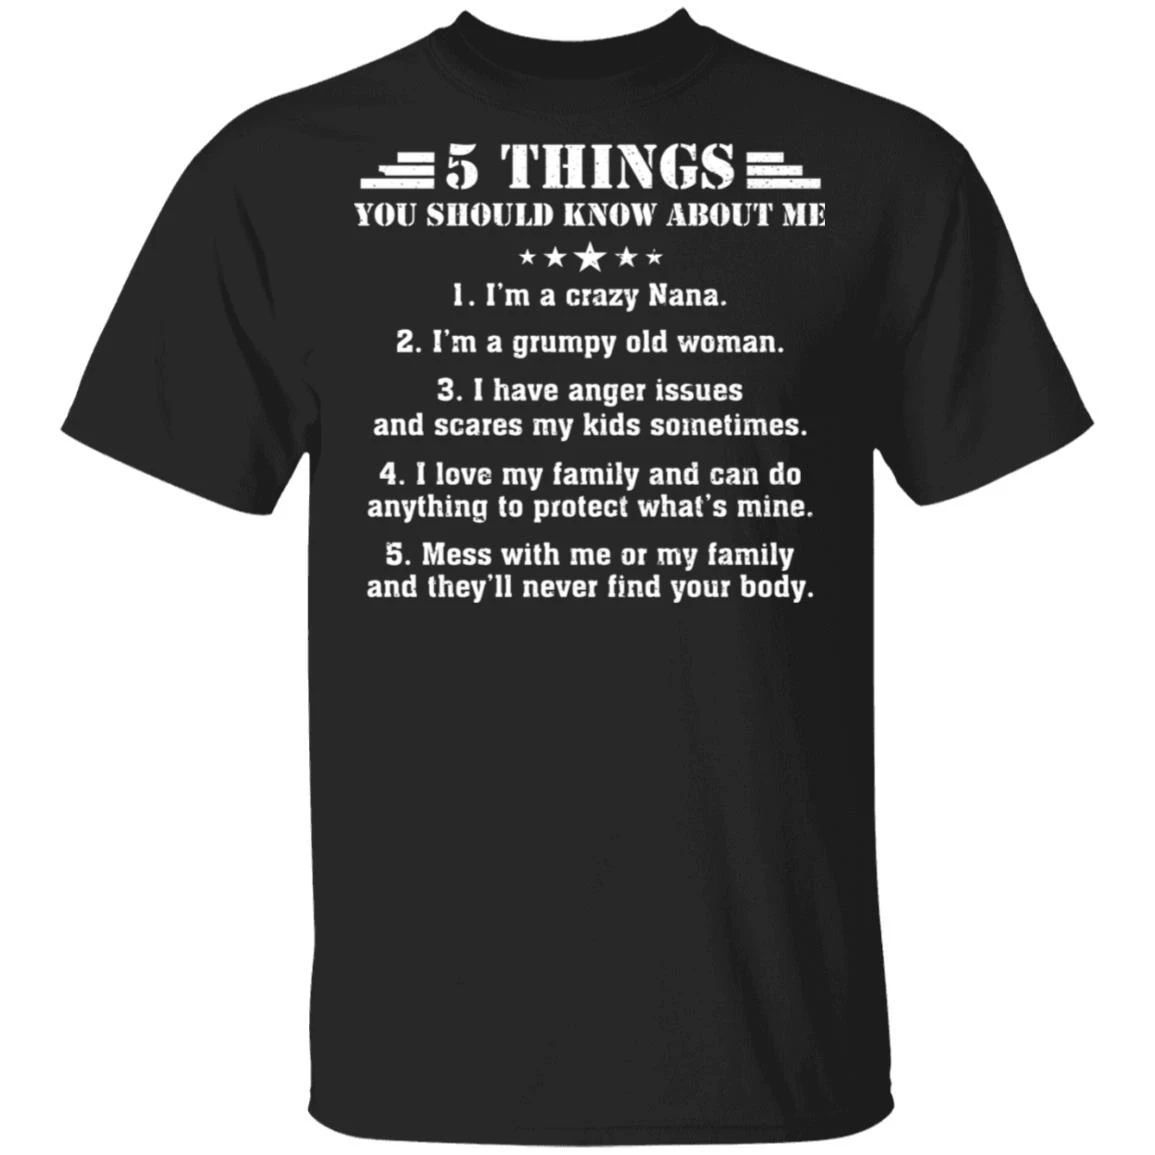 5 Things You Should Know About Me Nana T-shirt